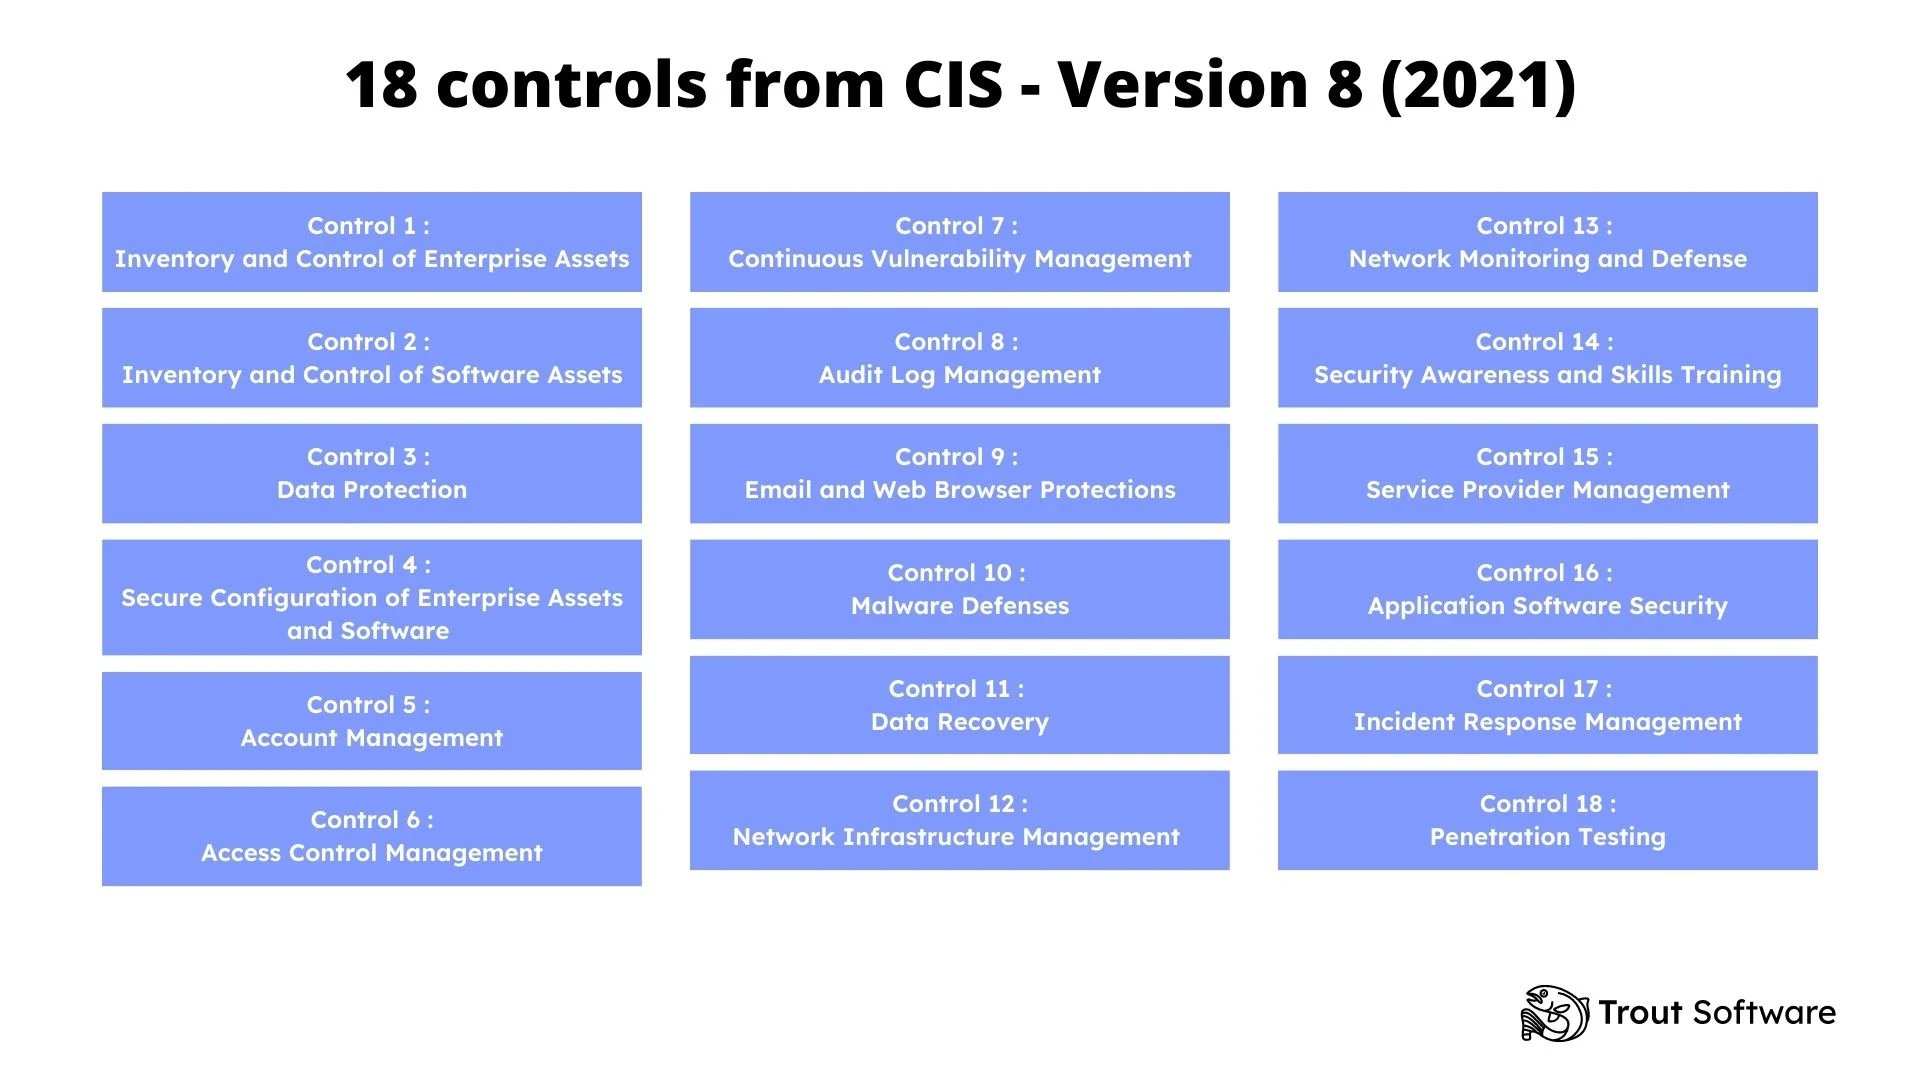 18 controls from CIS